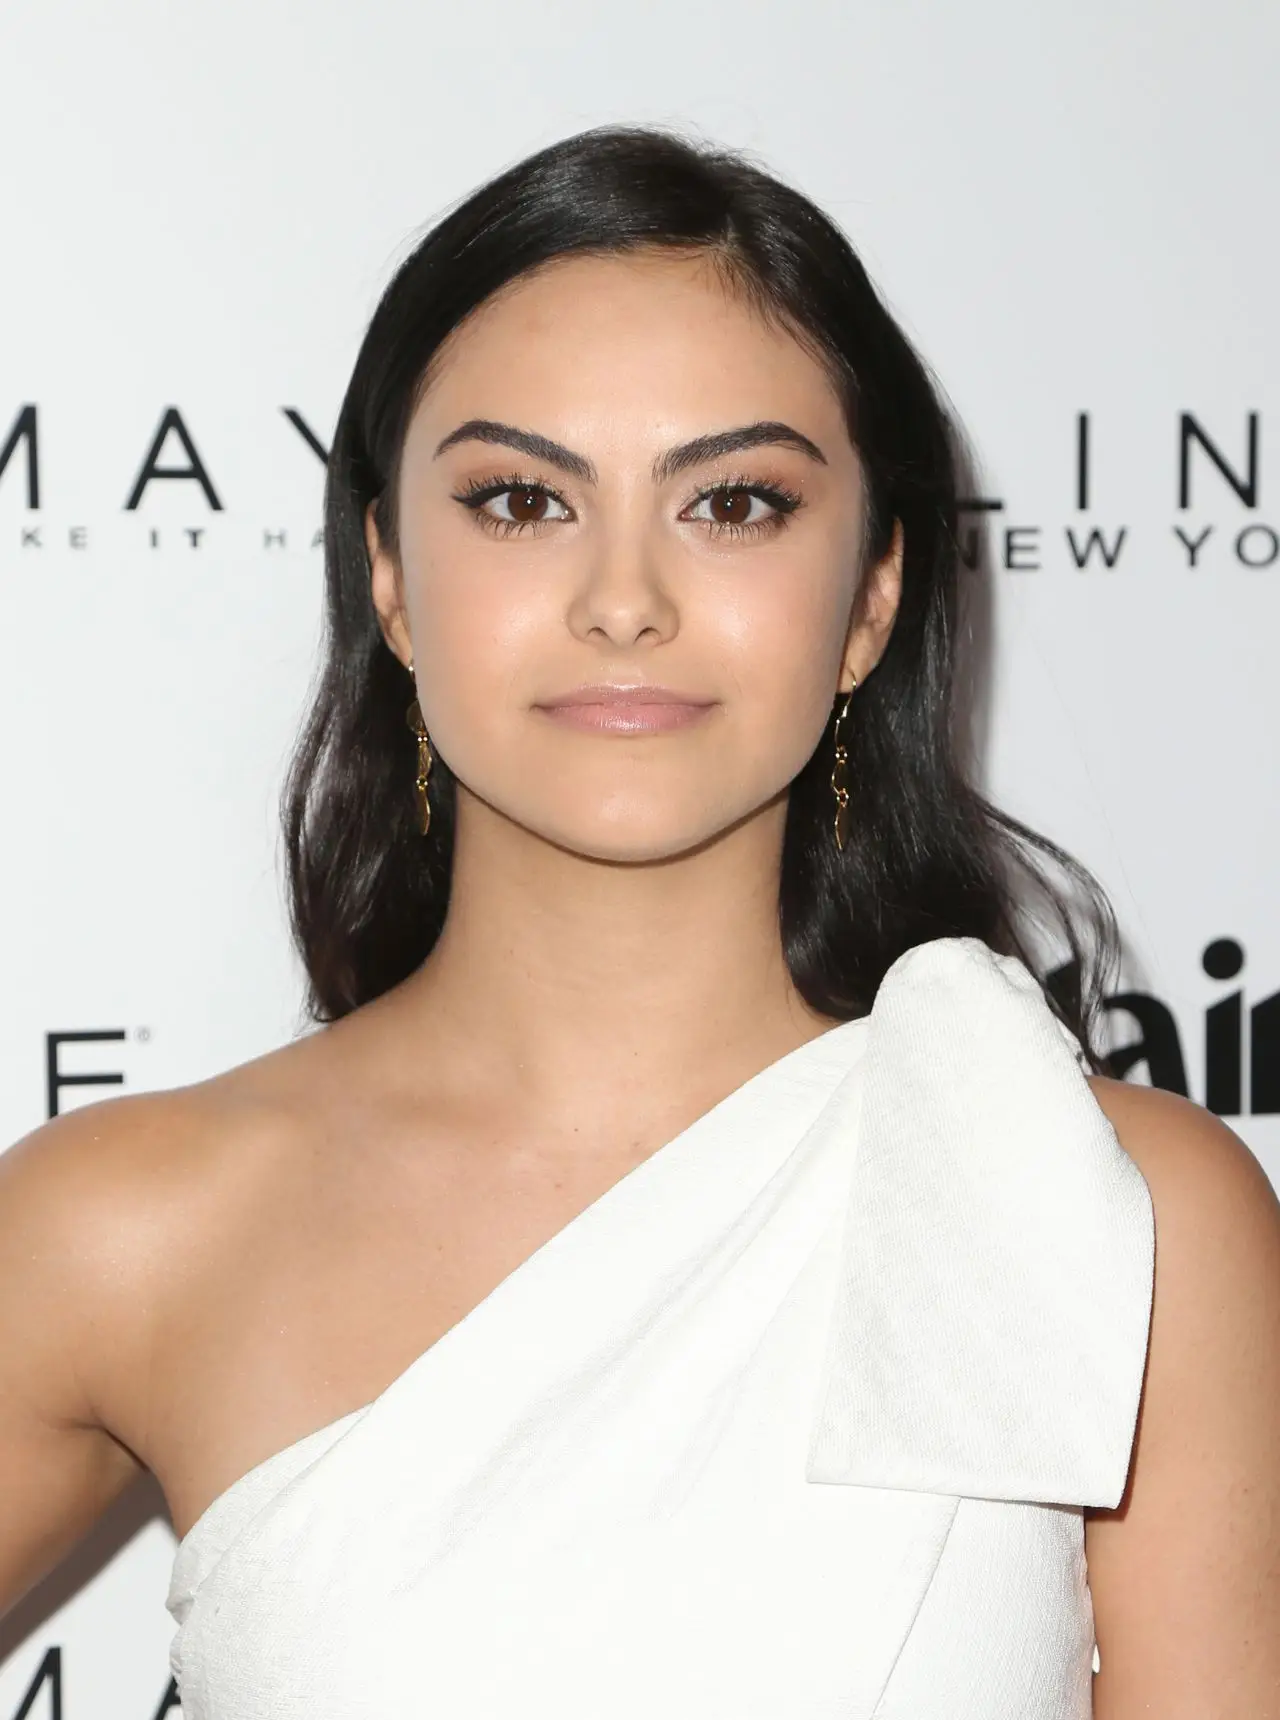 CAMILA MENDES AT MARIE CLAIRE FRESH FACES CELEBRATION IN WEST HOLLYWOOD08